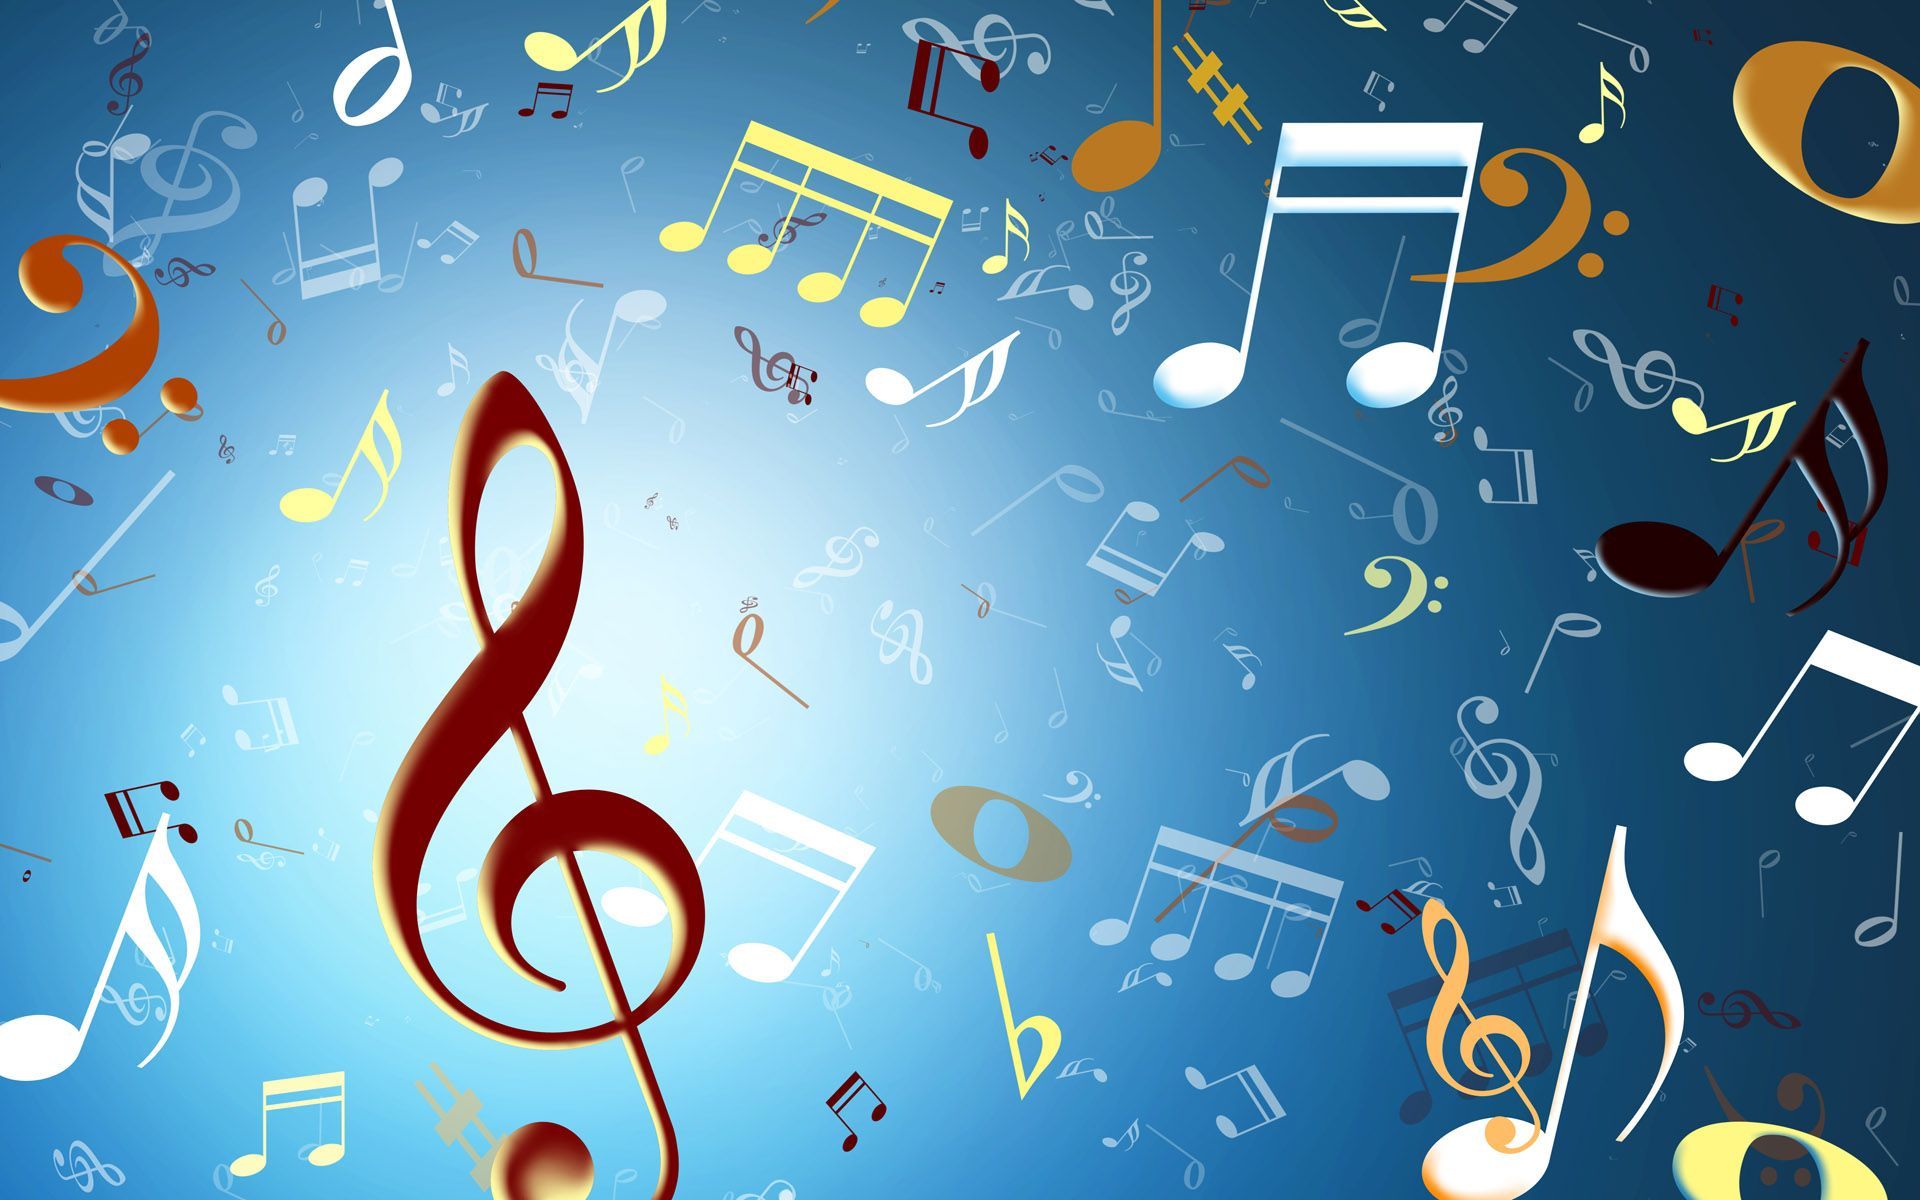 Music Wallpapers For Music Lovers | Online Magazine for Designers ...